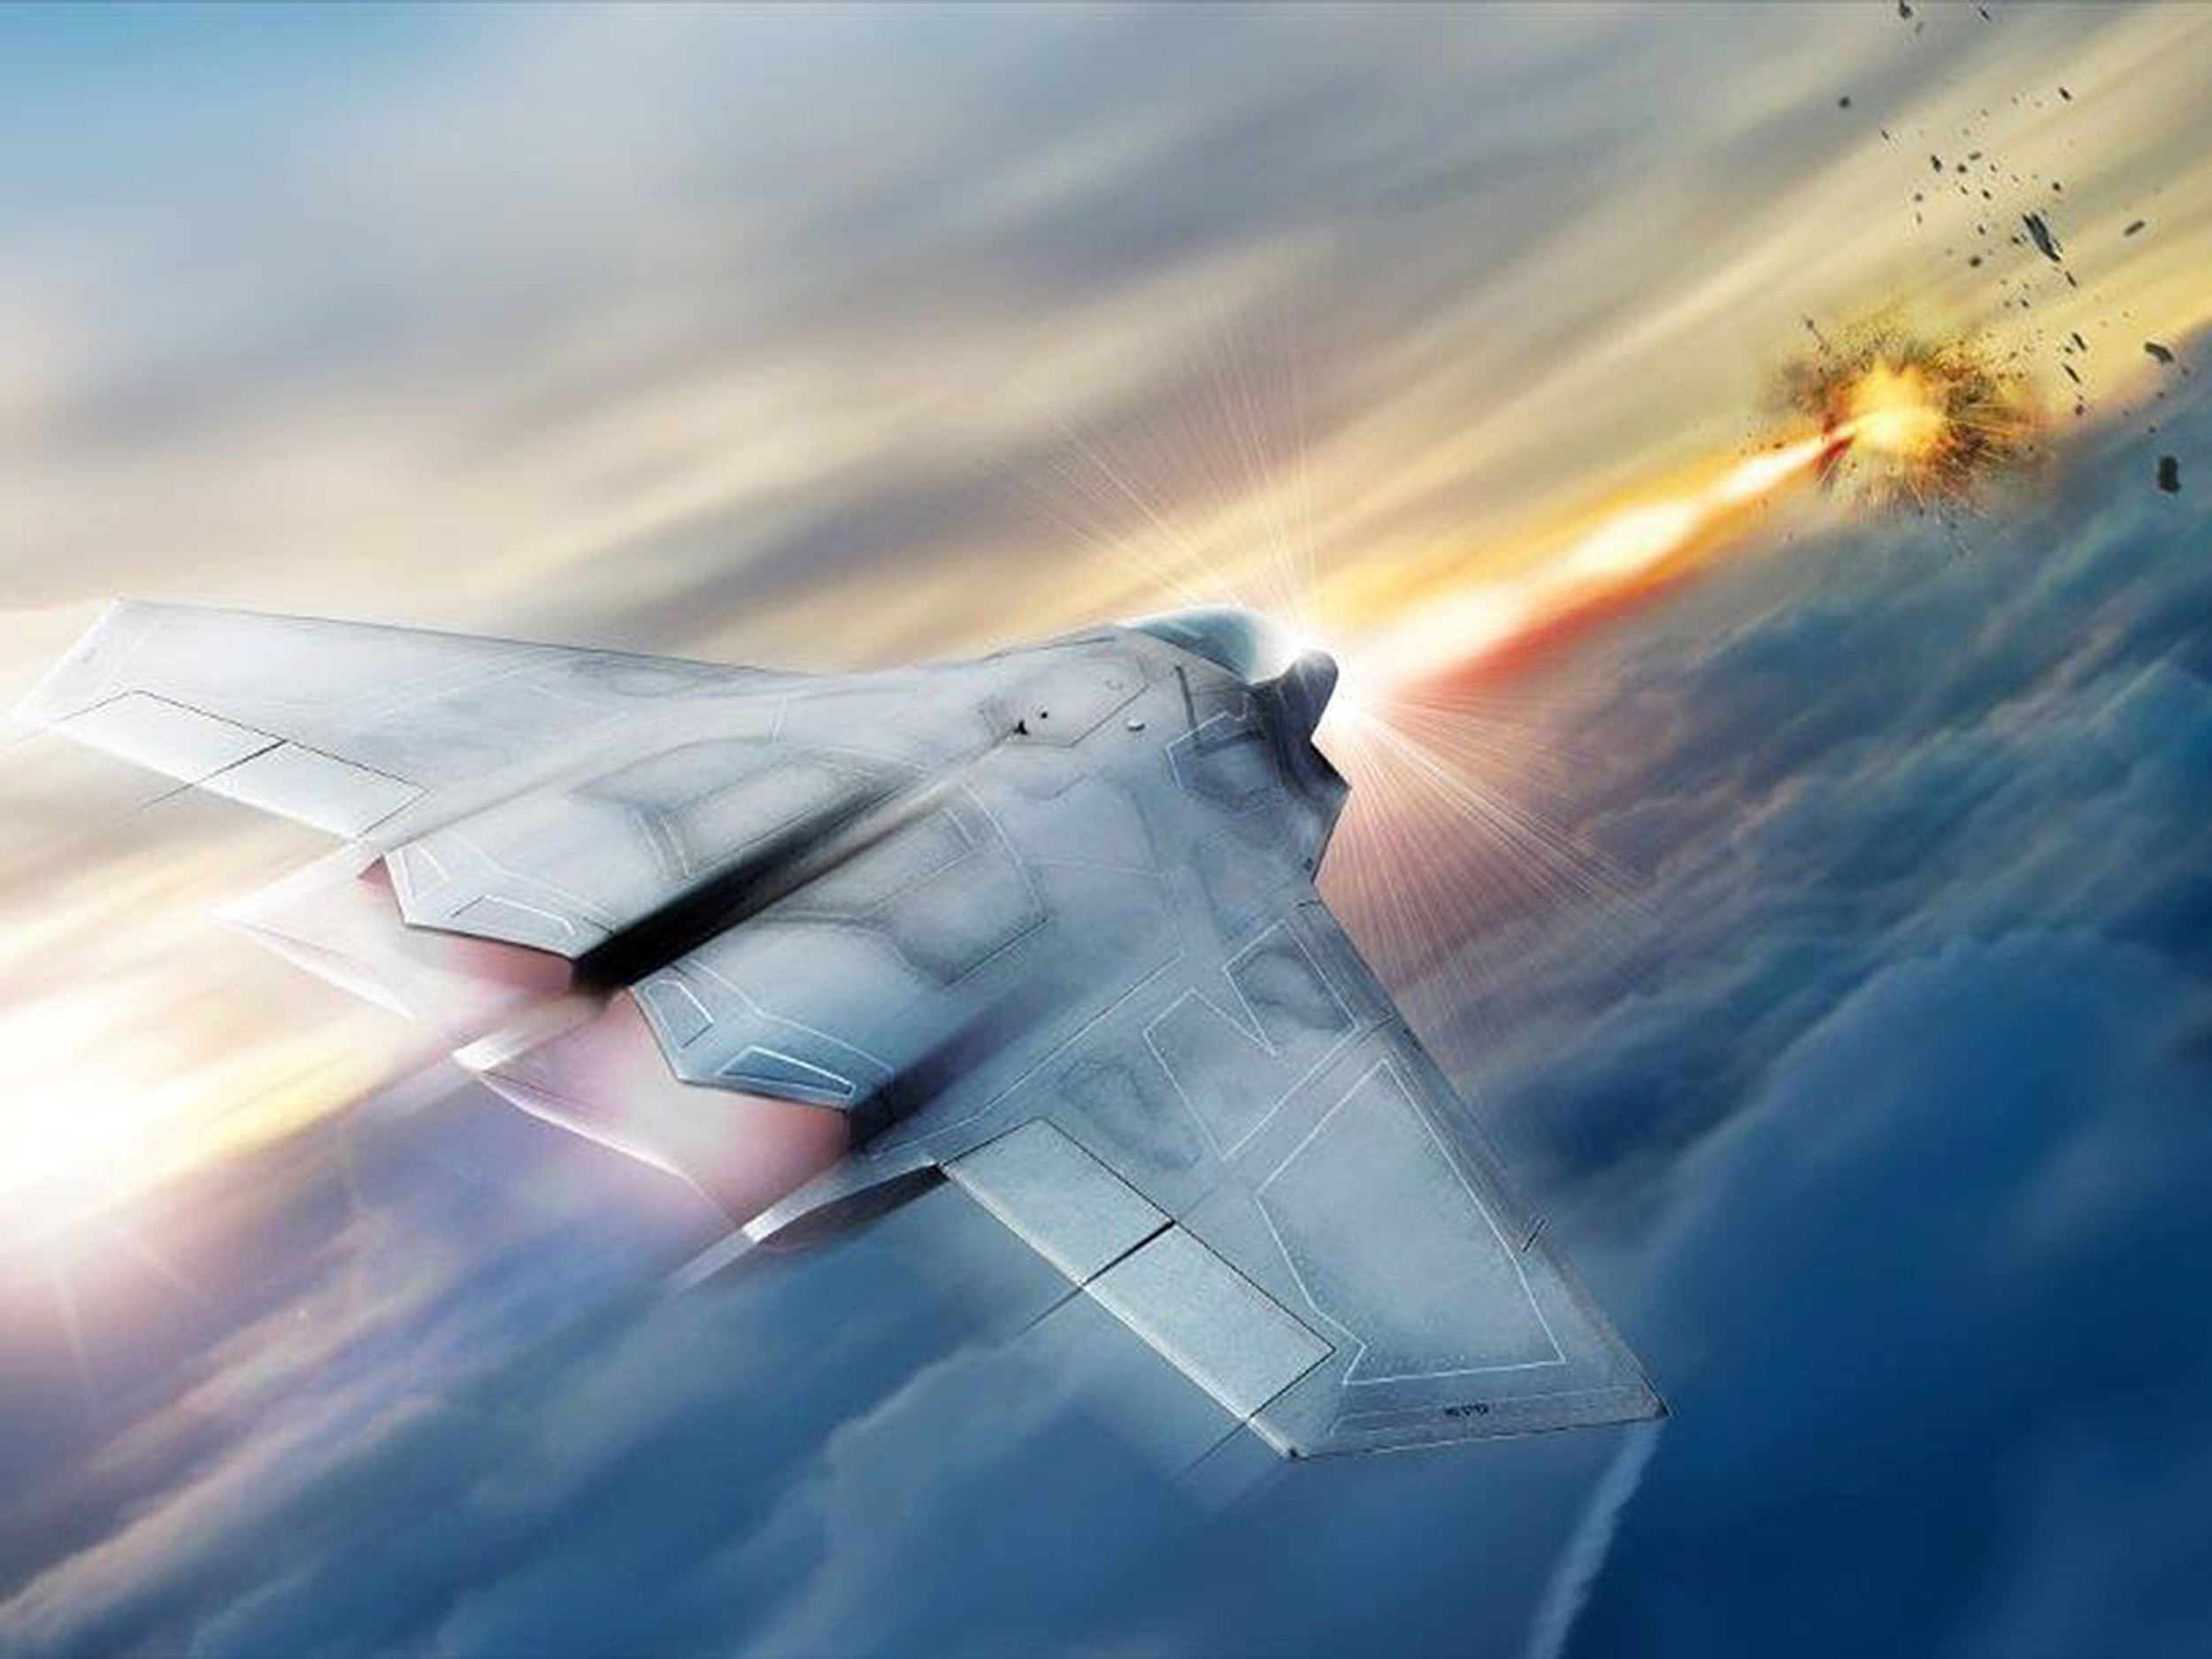 Illustration showing a tactical fighter jet with a high energy laser weapon system blasting something in the distance.